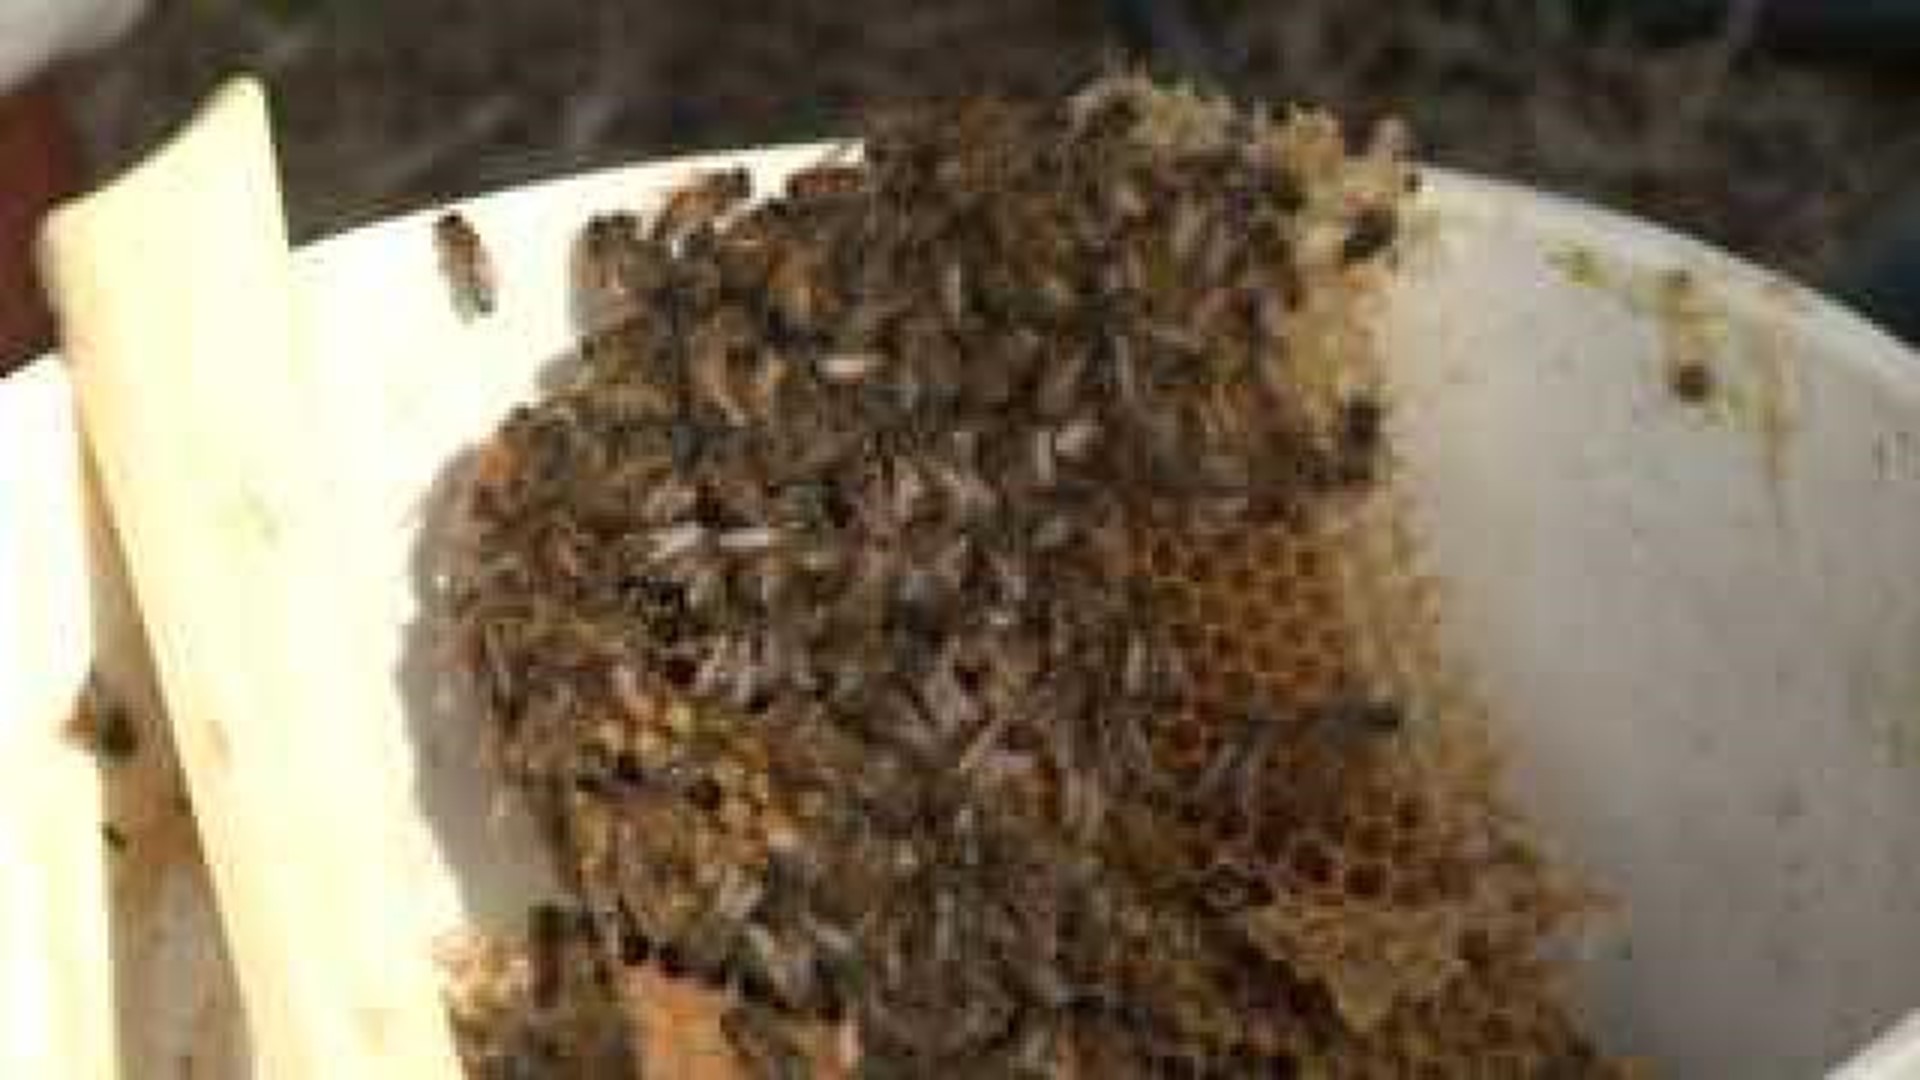 Bees Given New Home